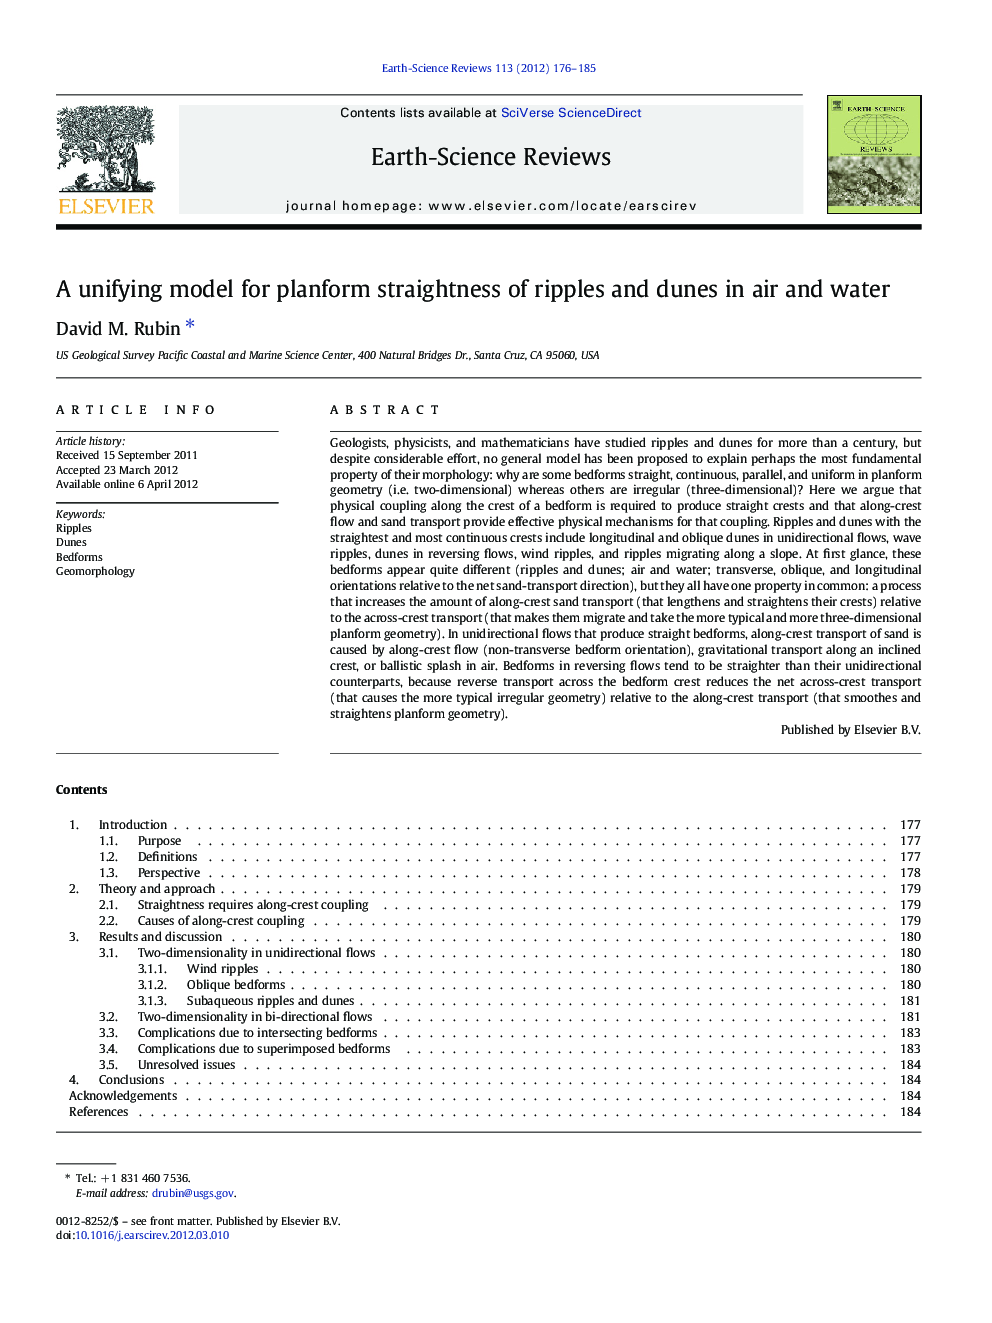 A unifying model for planform straightness of ripples and dunes in air and water